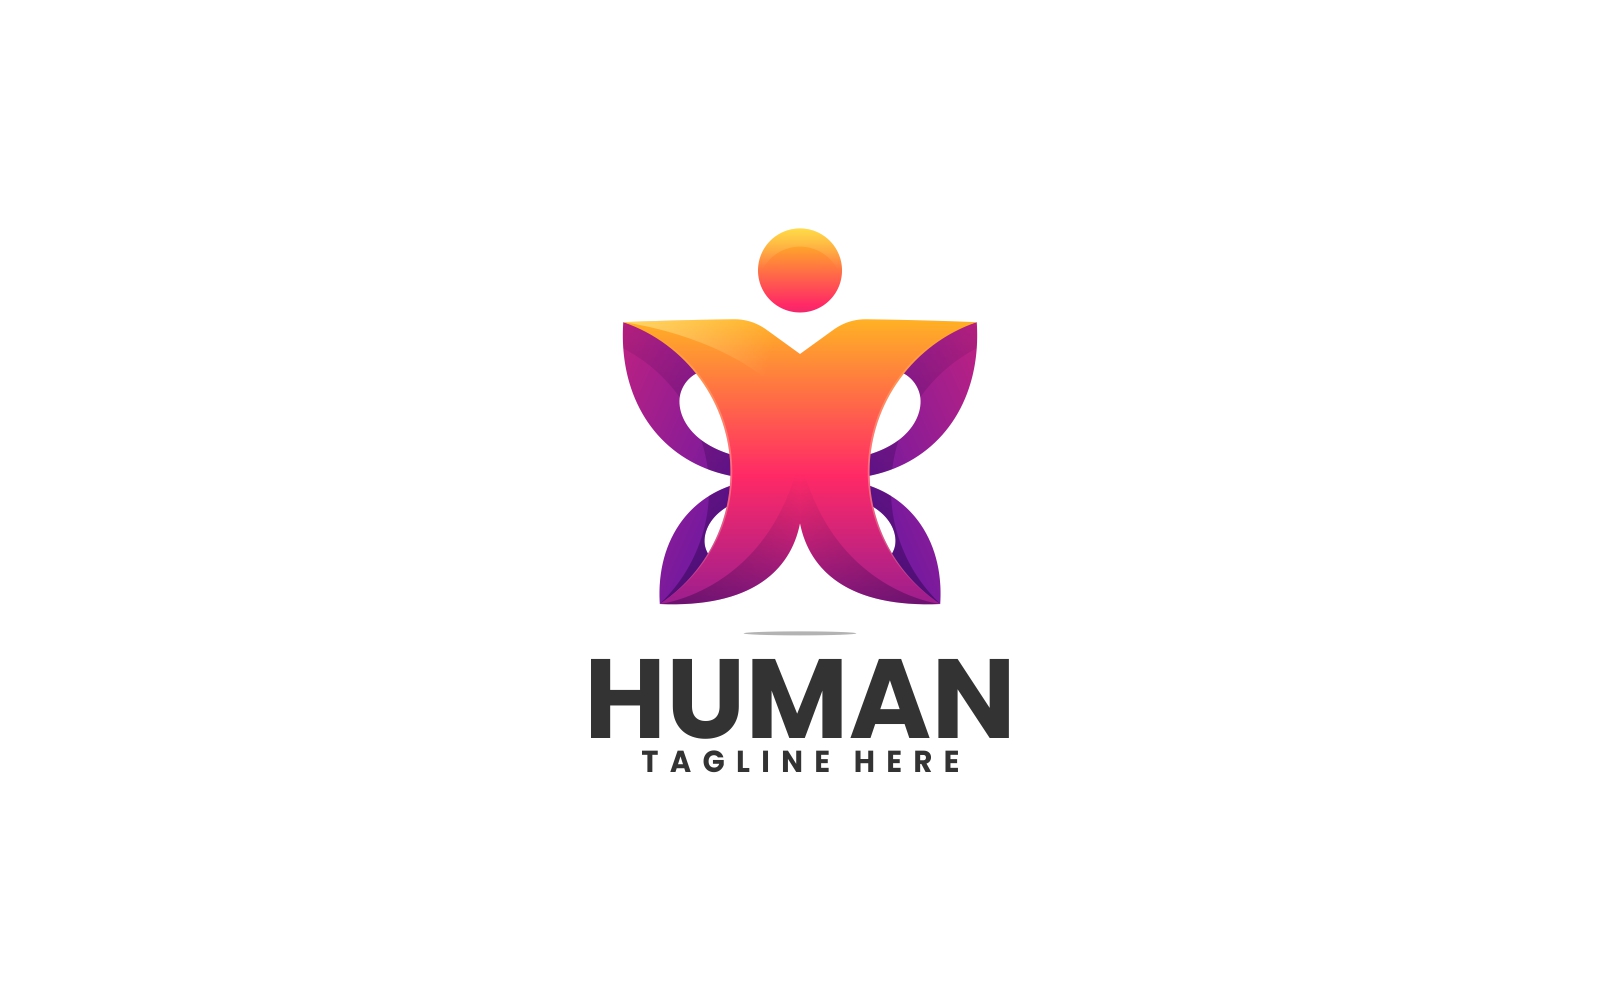 Human Gradient Colorful Logo Style